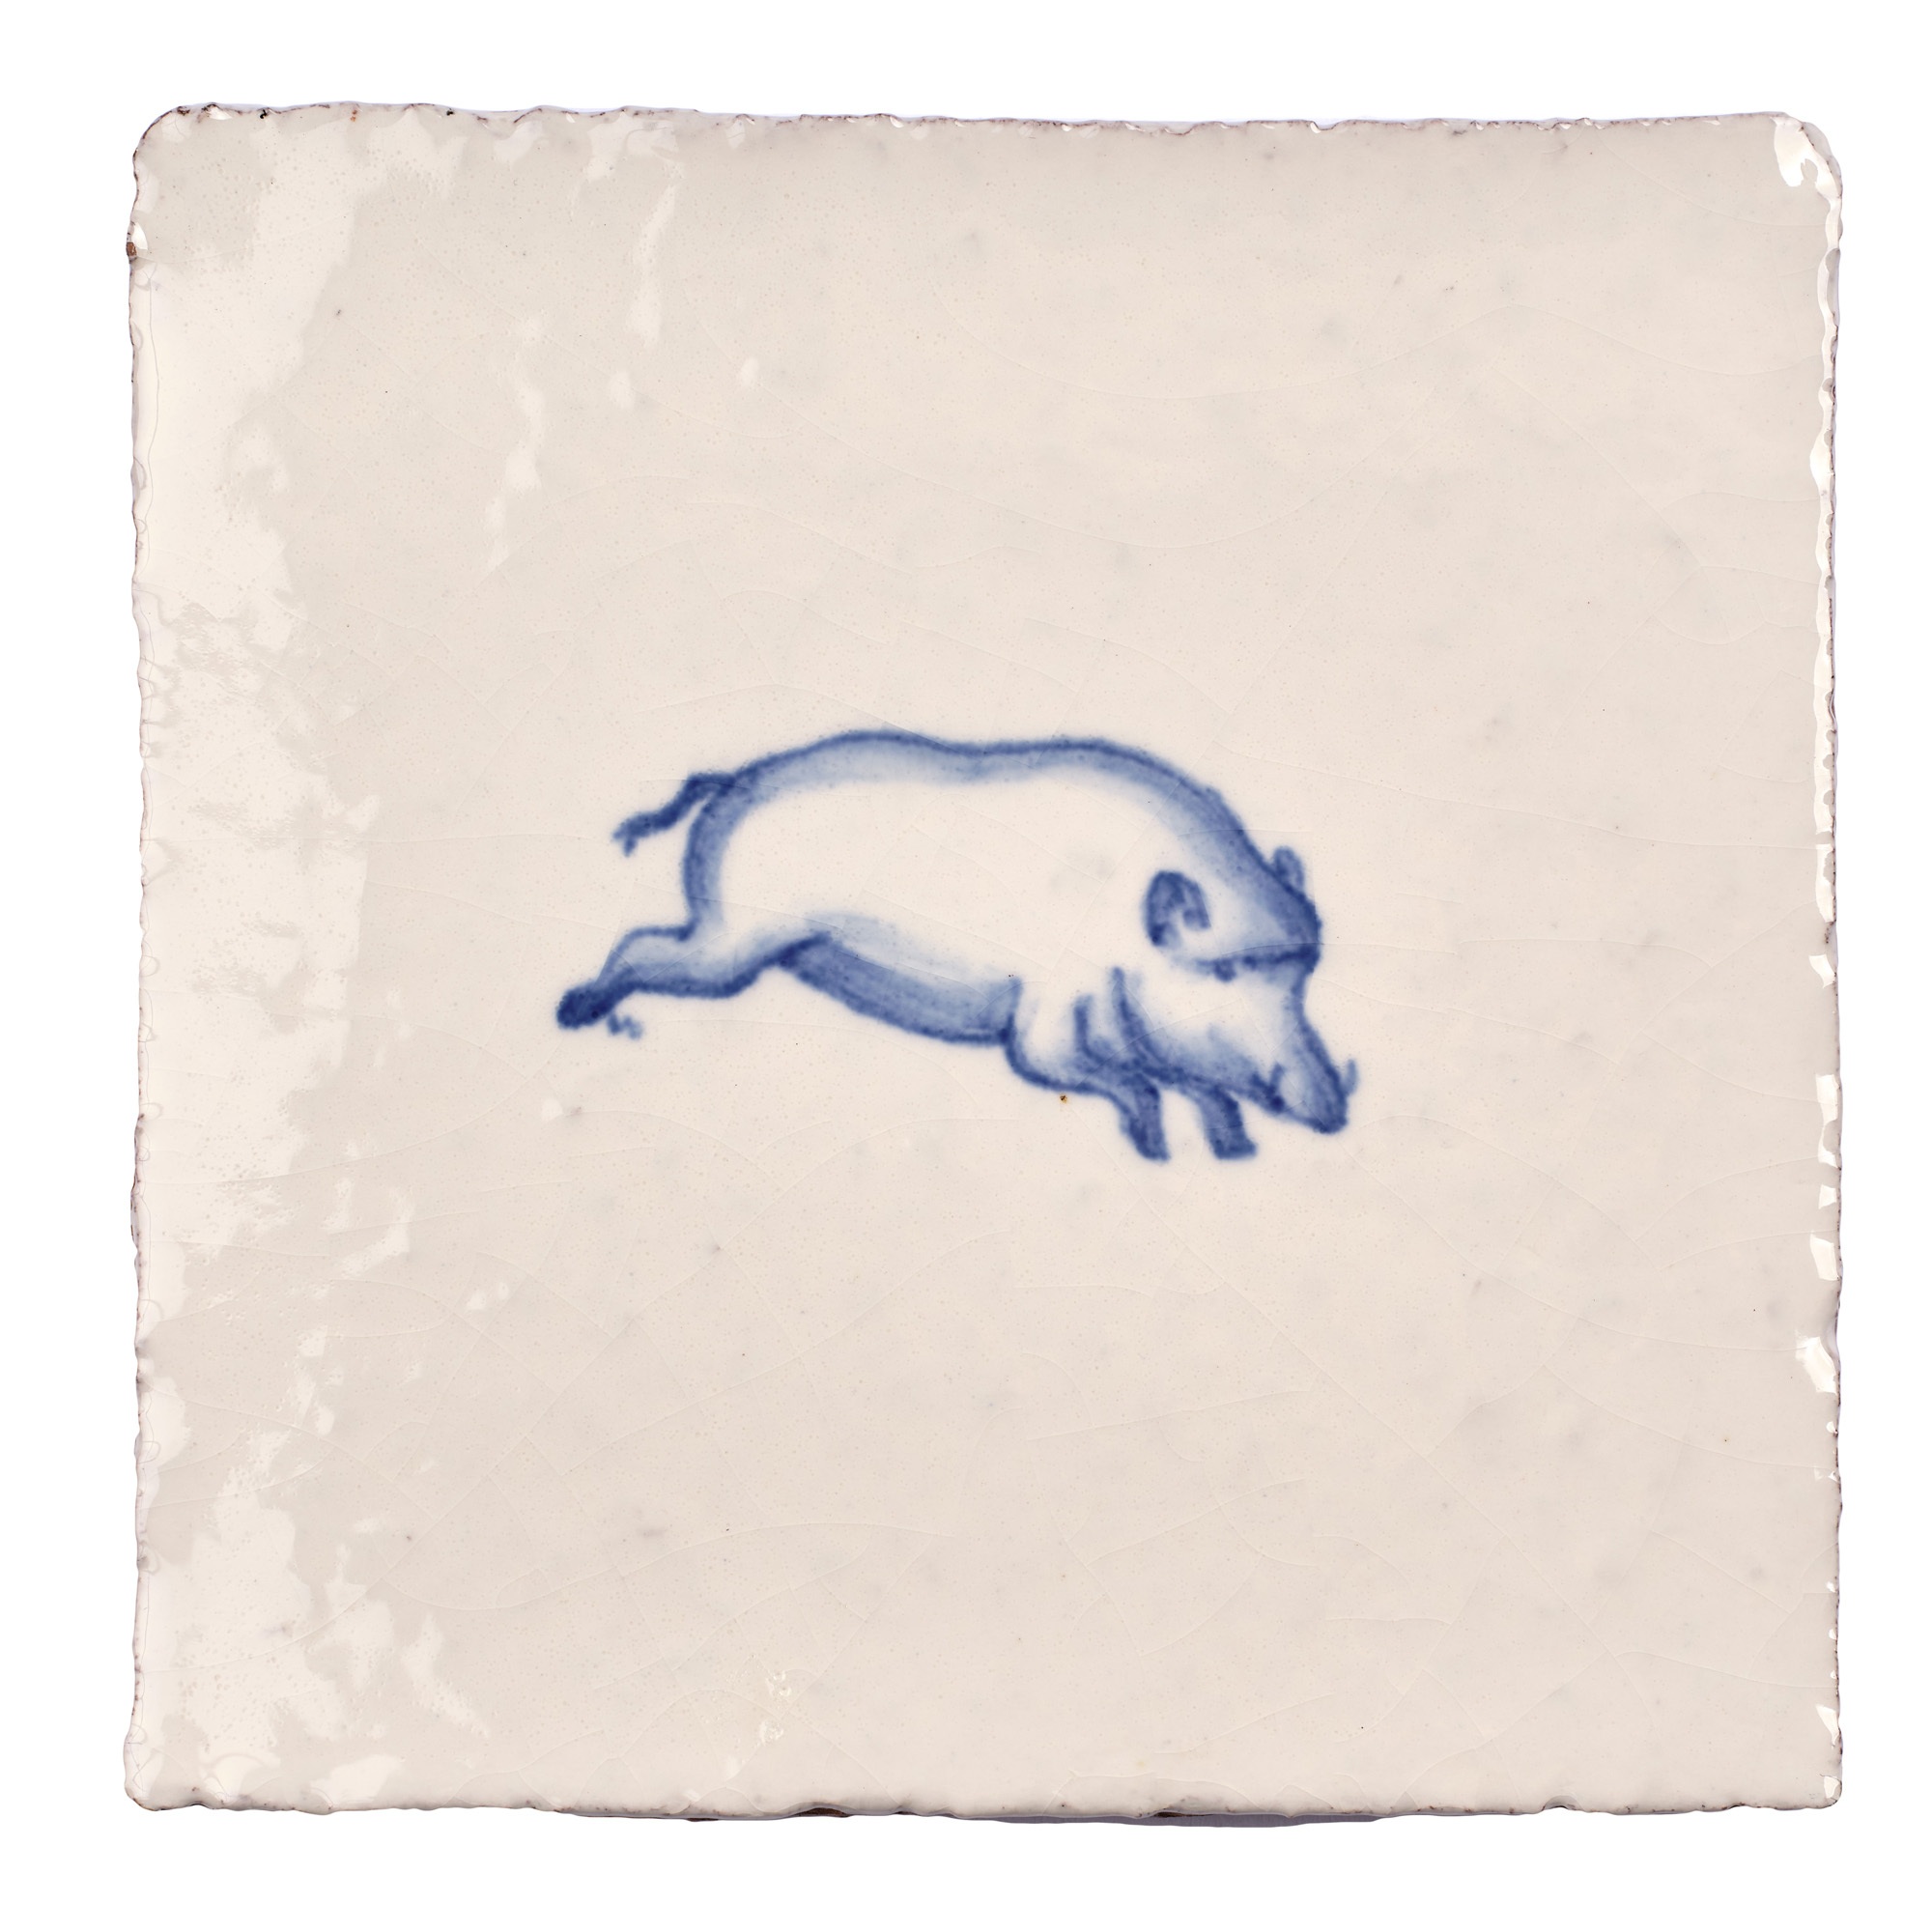 Wilding Boar Square, product variant image